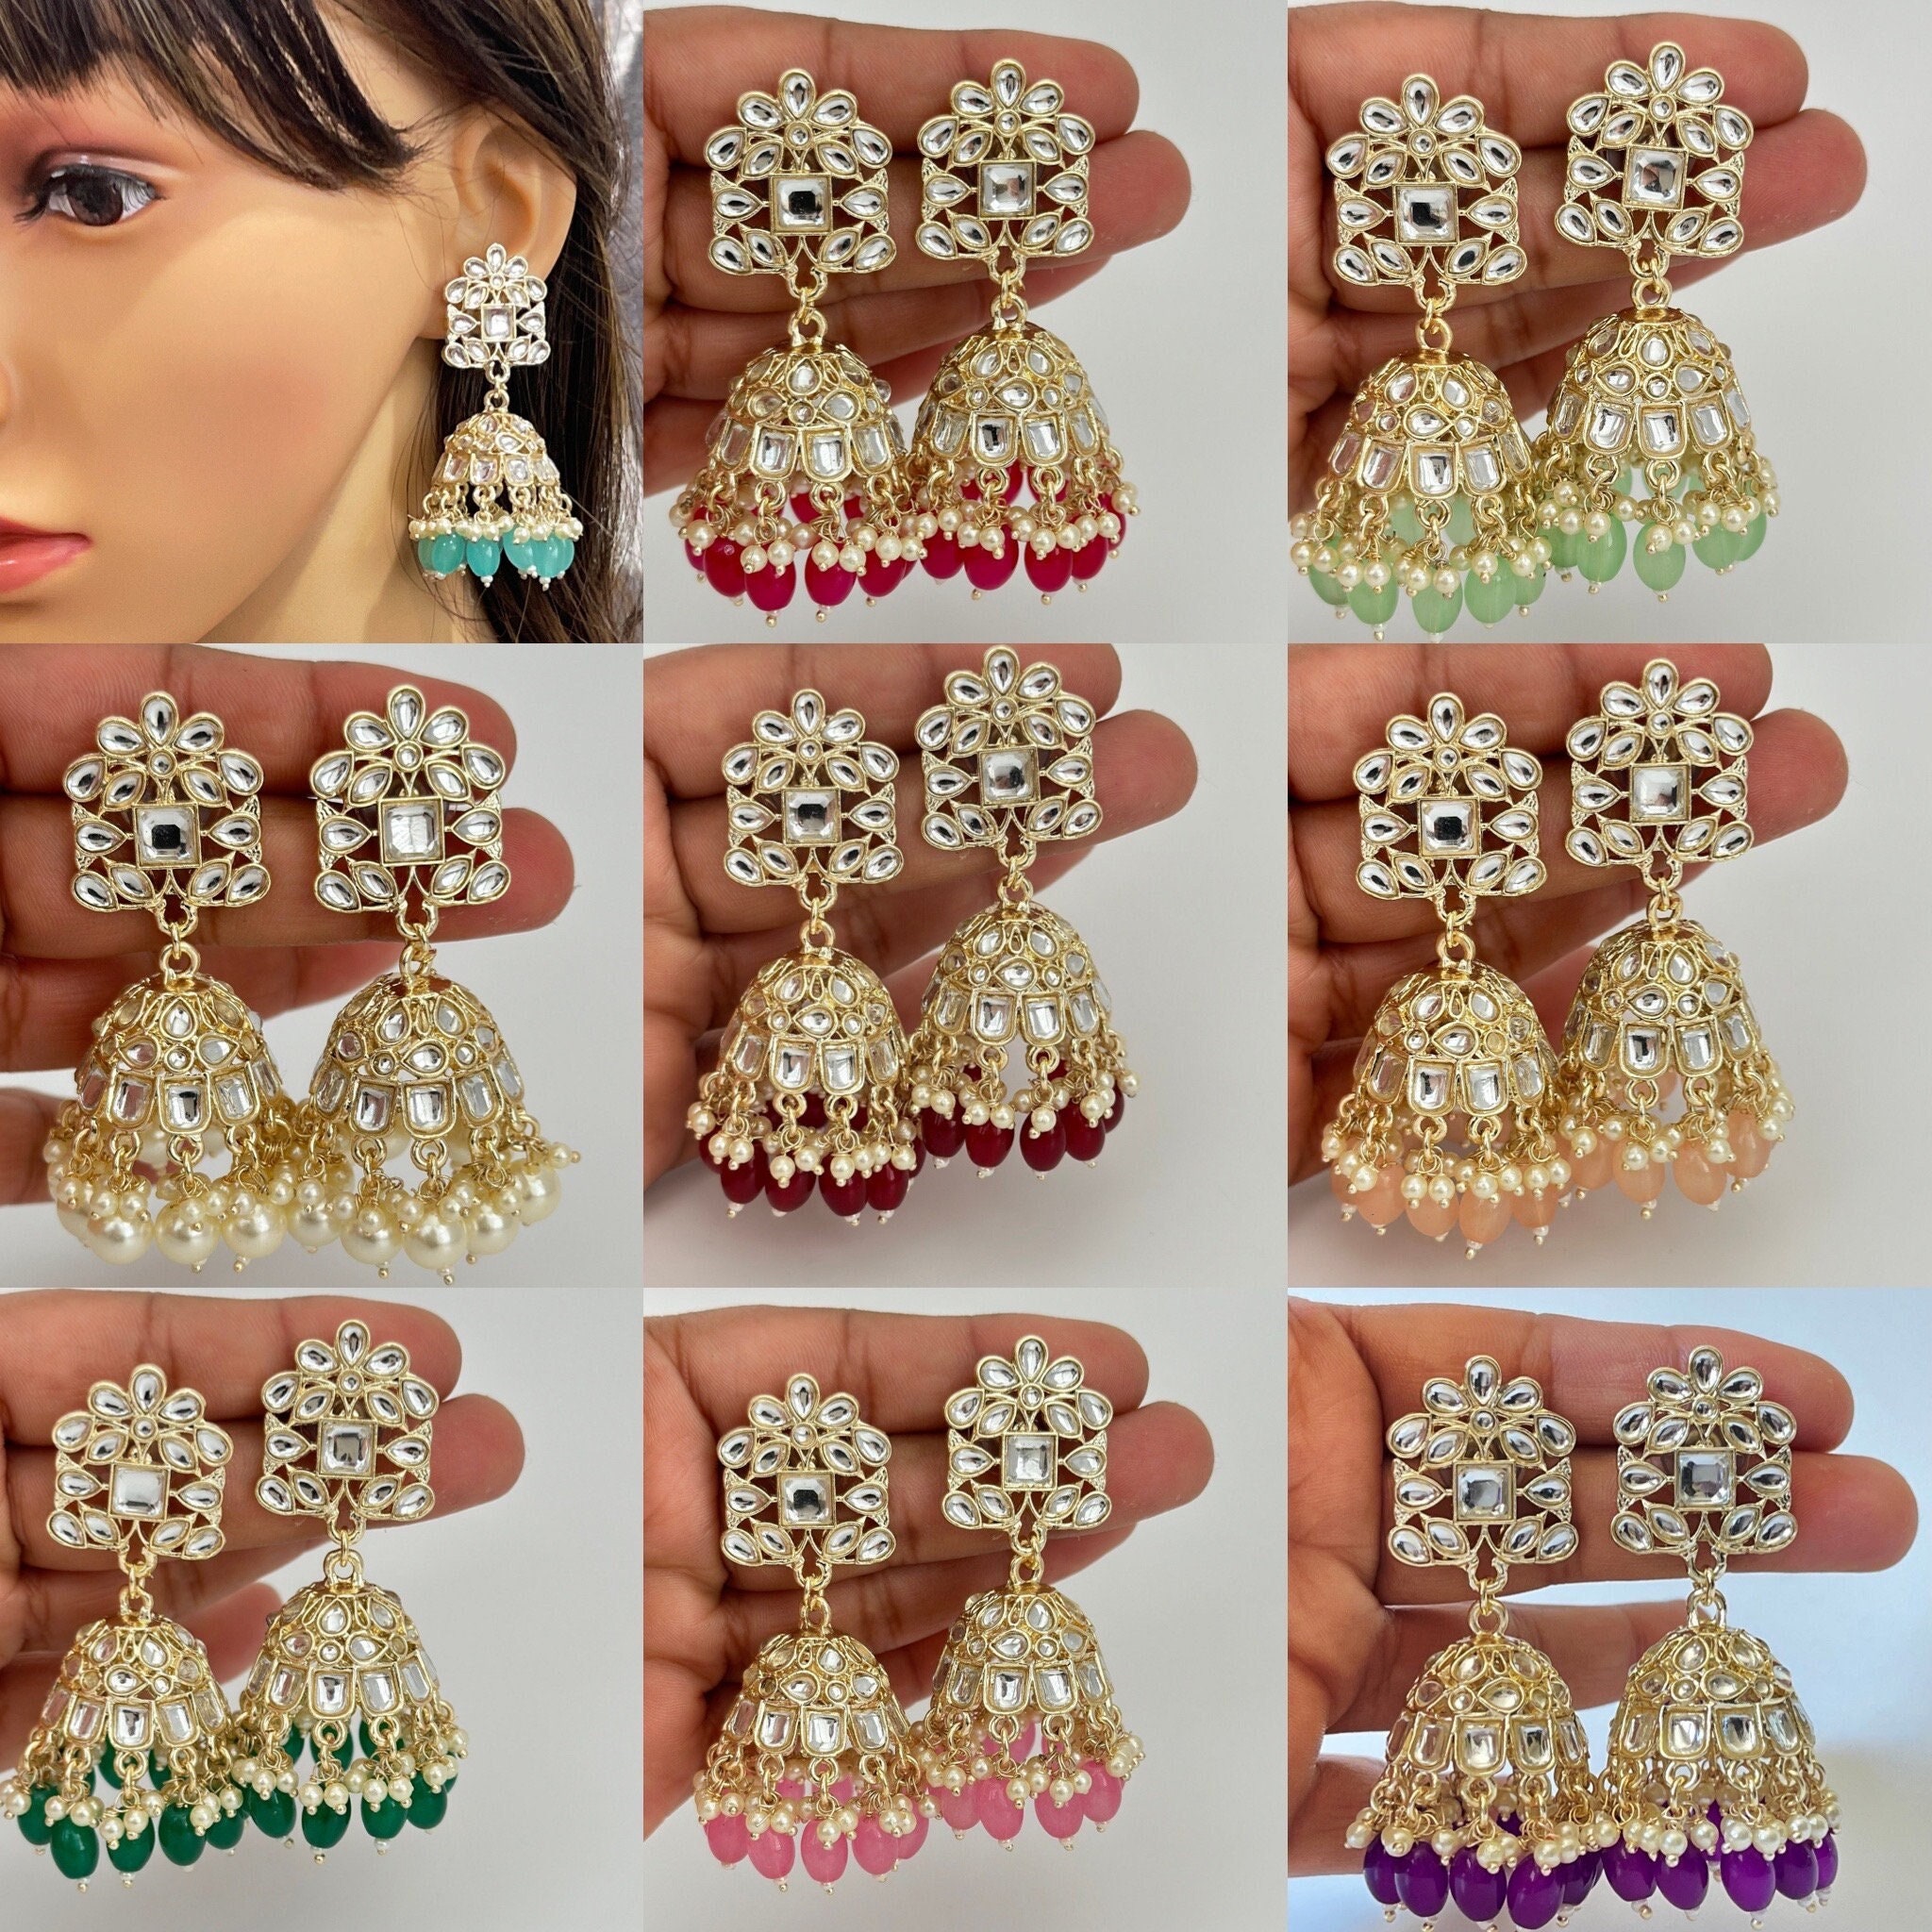 Match earrings for saree, suit, Kurti || #stylingtips || tips for earrings  - YouTube